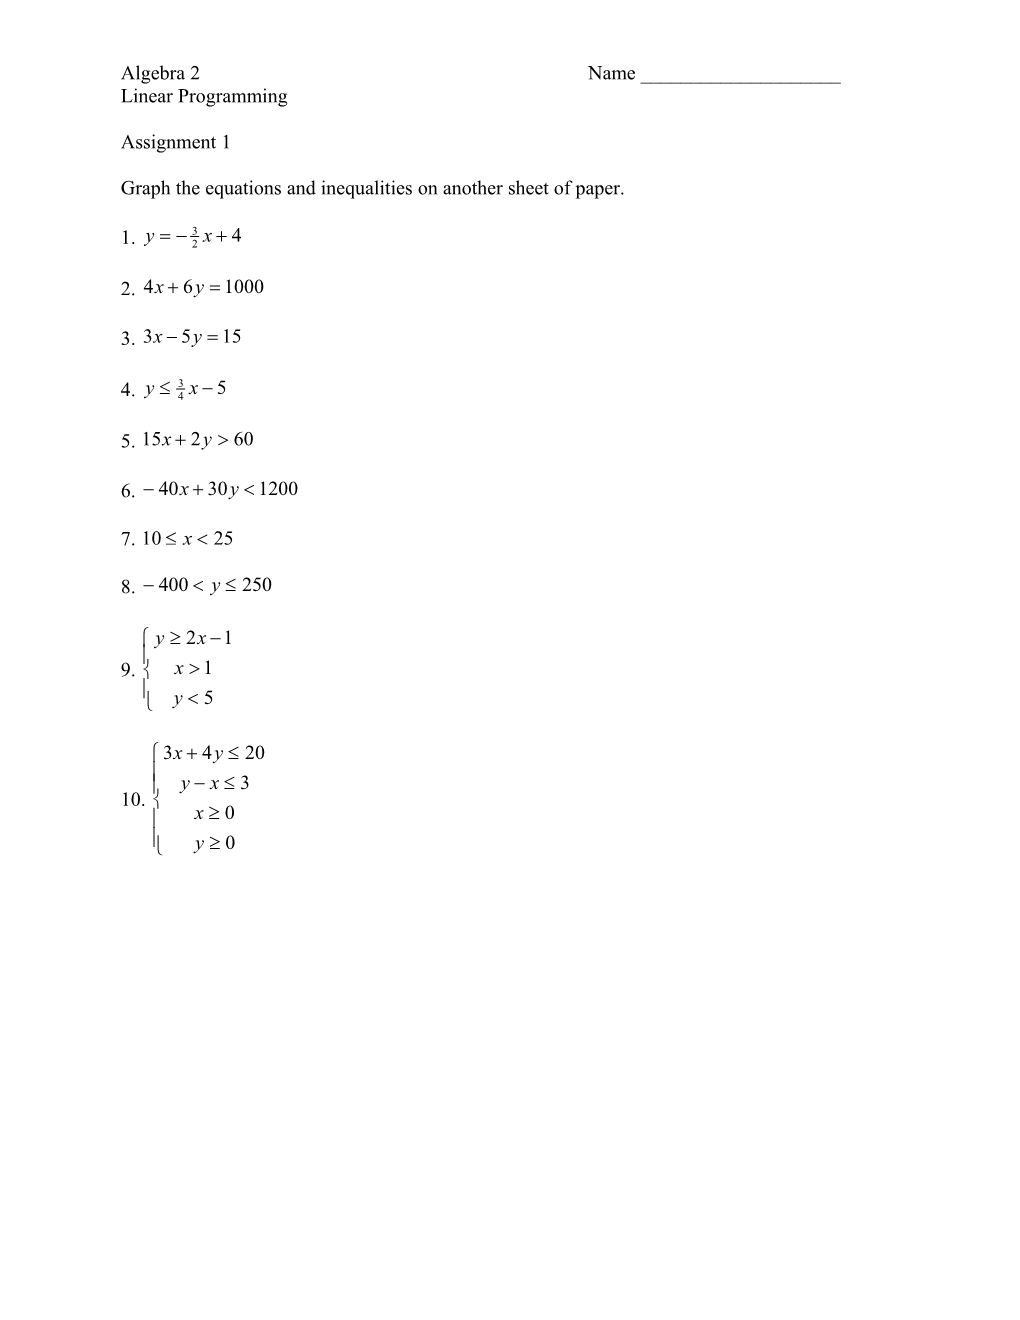 Graph the Equations and Inequalities on Another Sheet of Paper